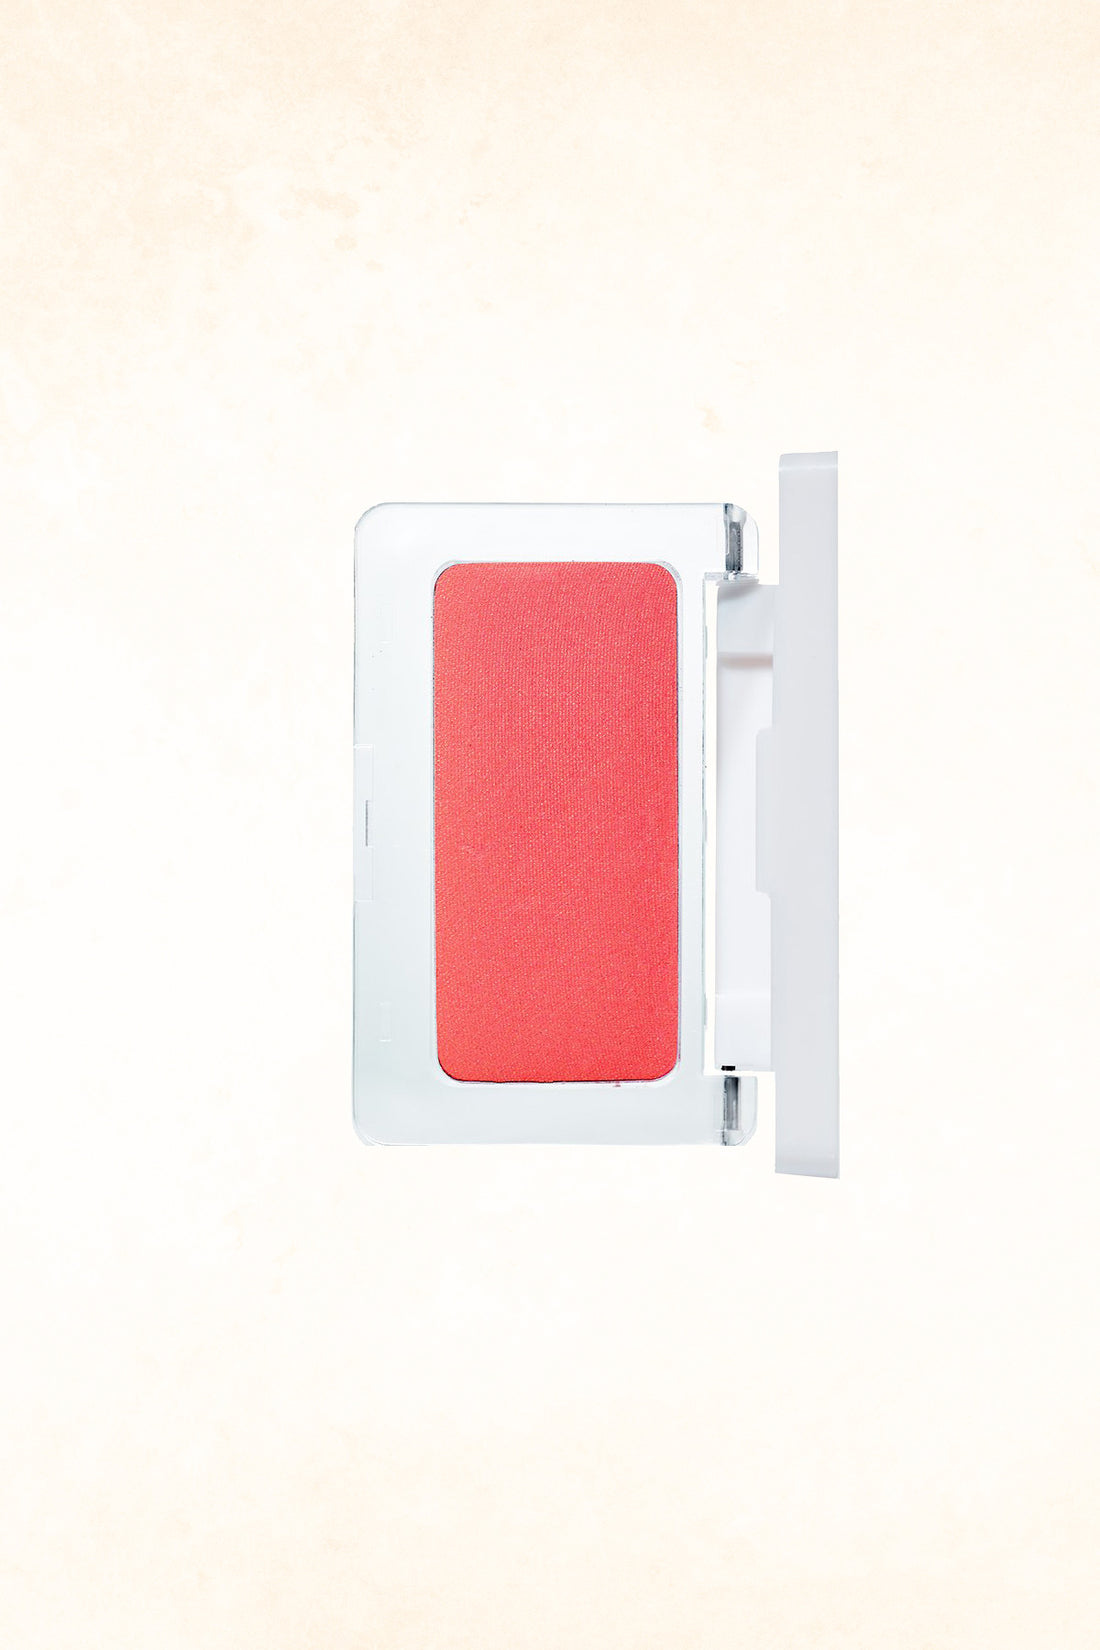 RMS Beauty – Pressed Blush – Crushed Rose